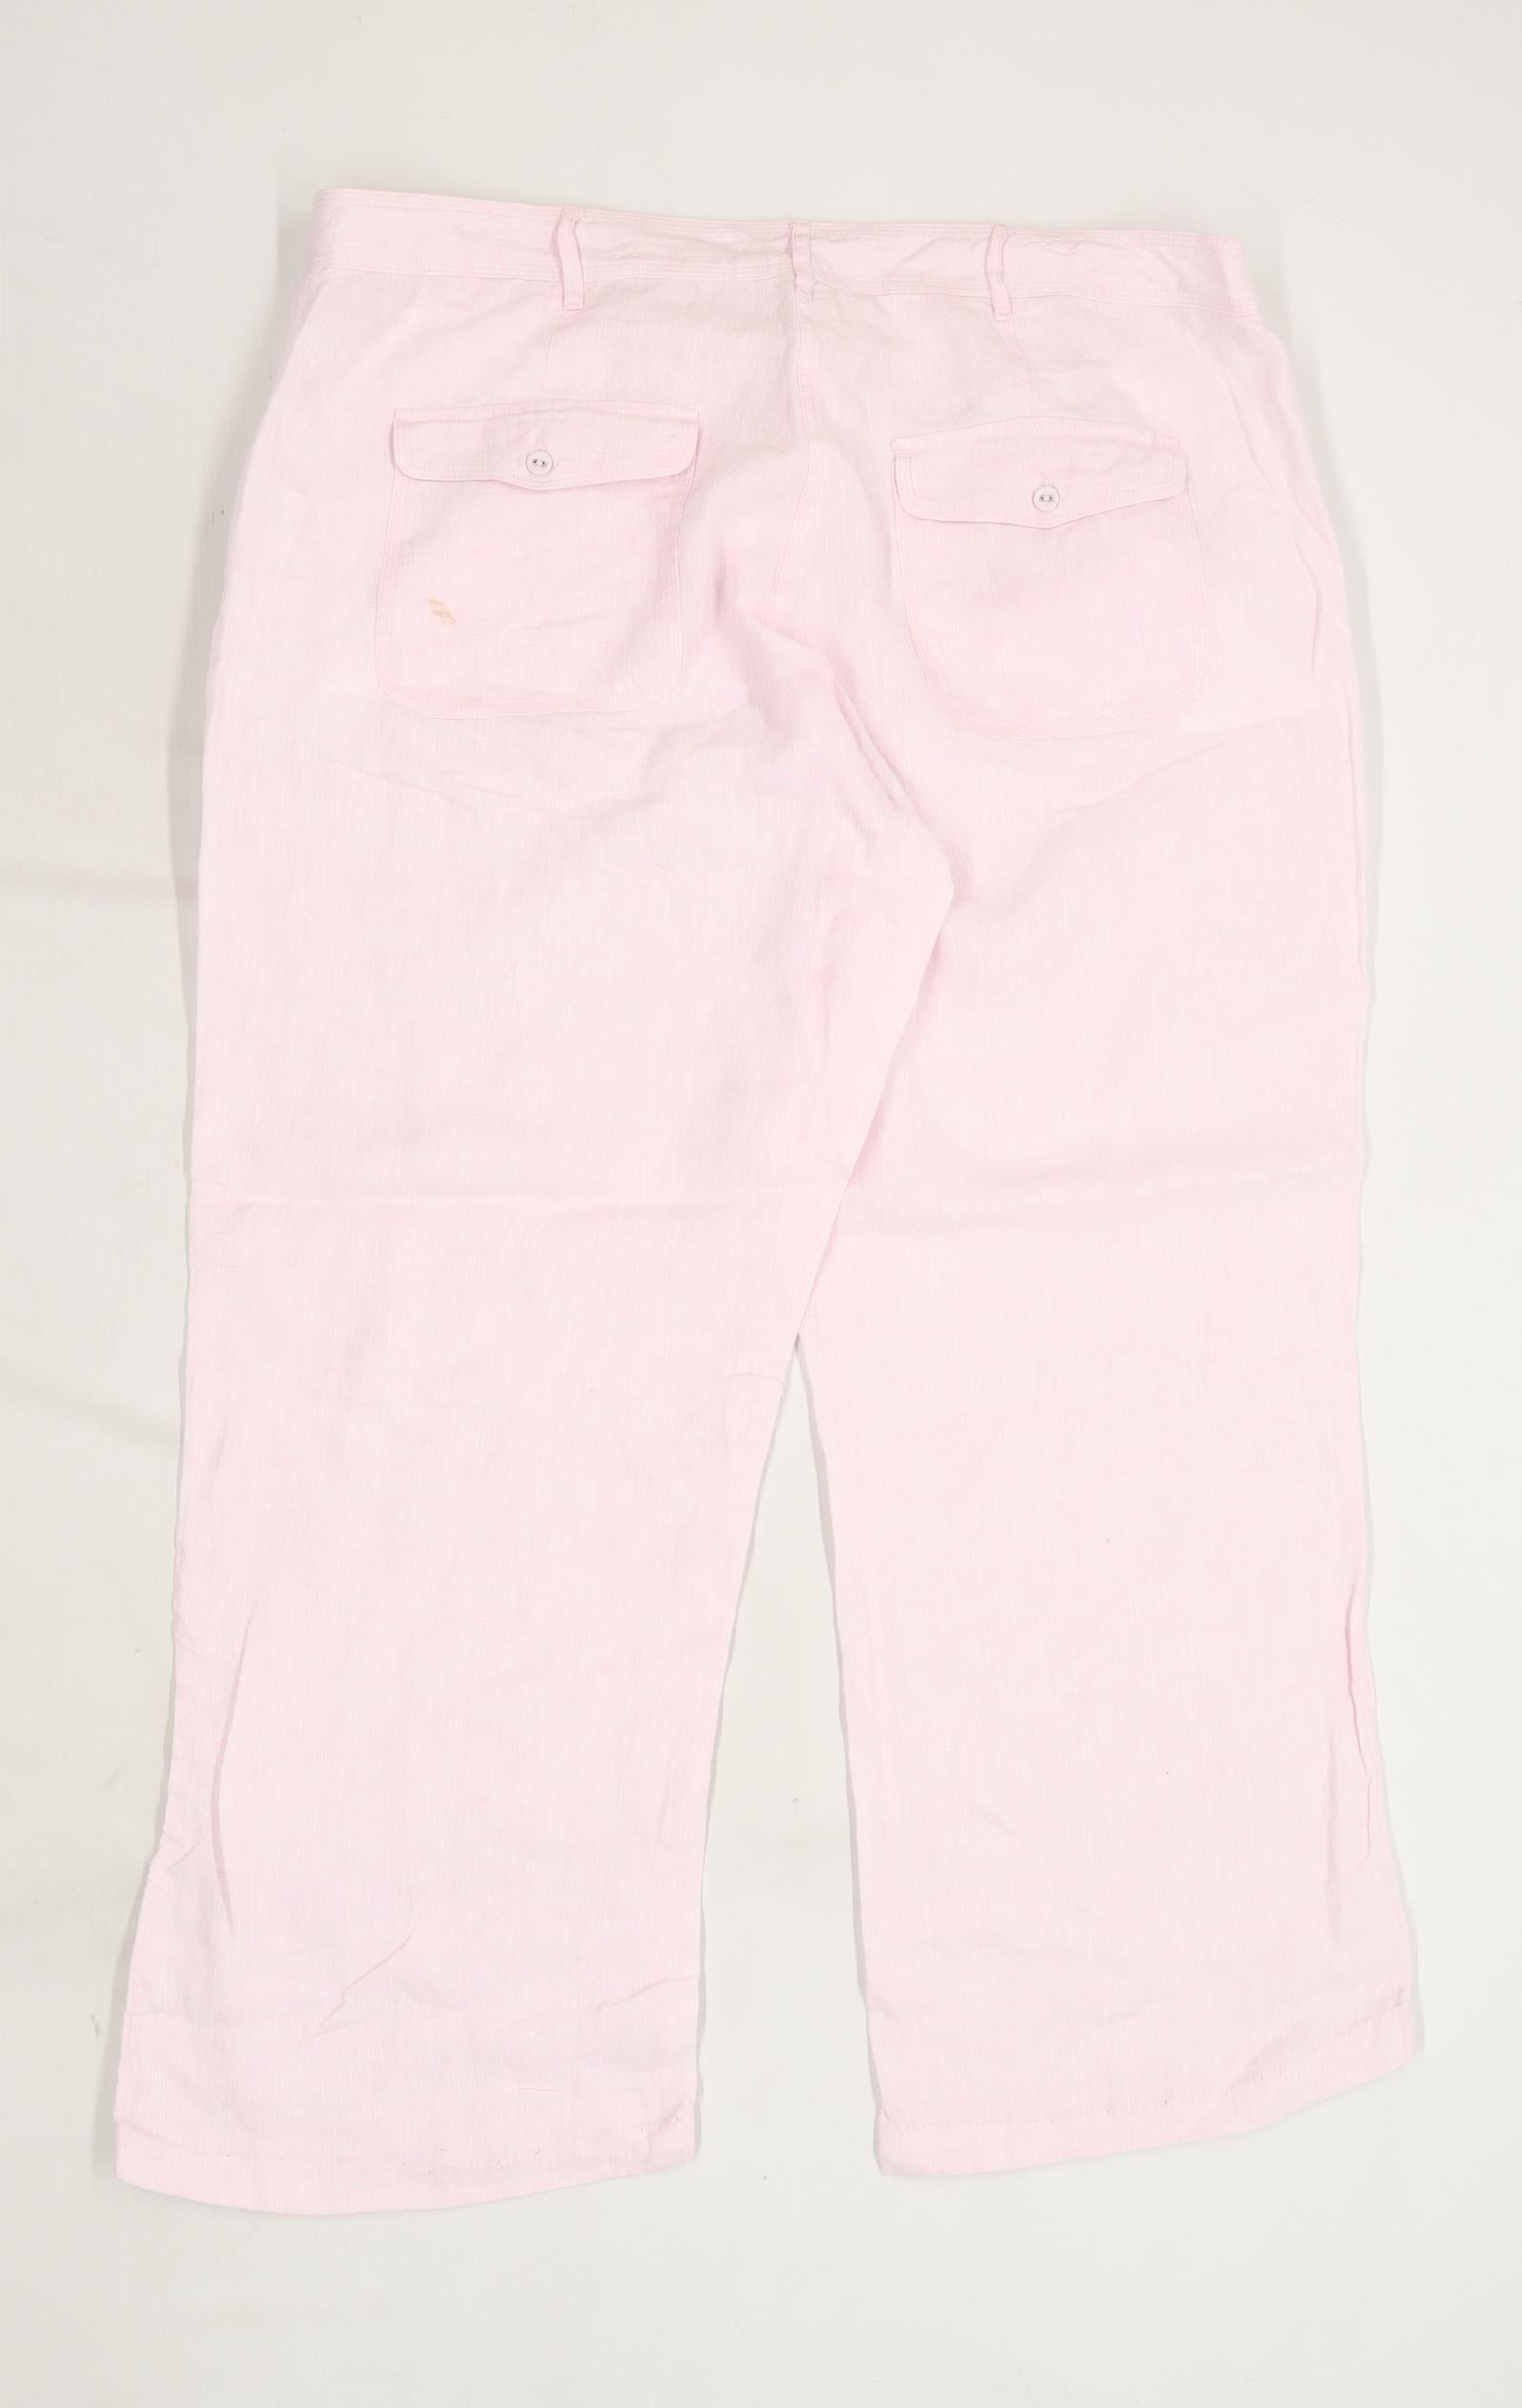 Cotton Traders Womens Pink Elastic Waist Stretch Jeggings Trousers 22UK  W42” L31 | eBay